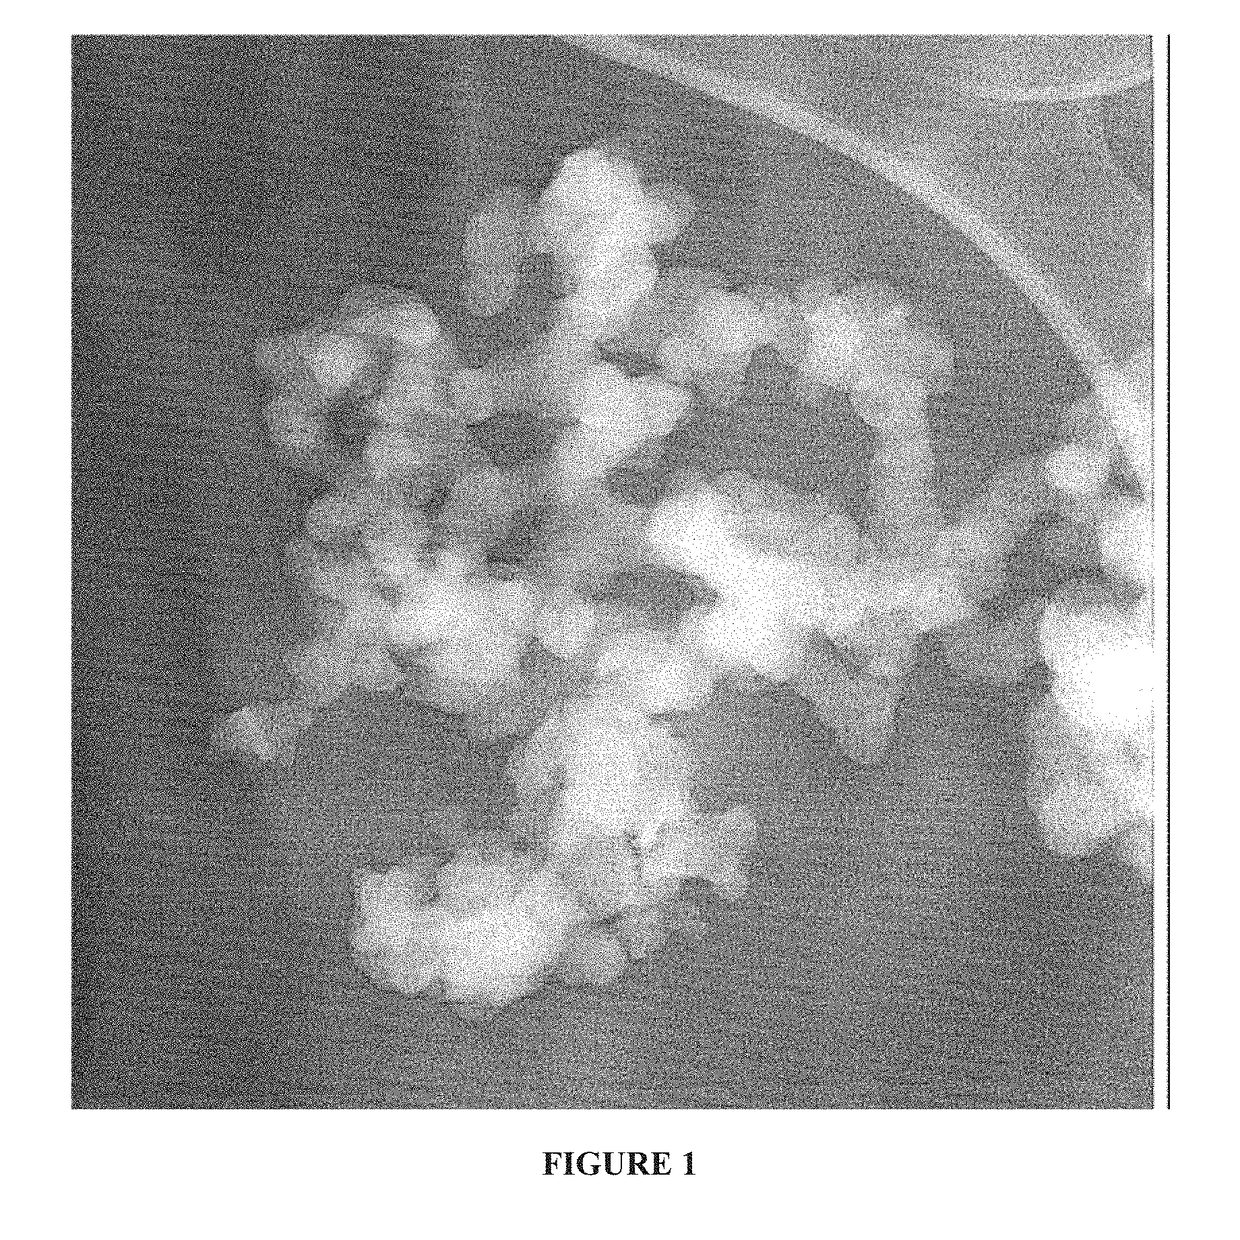 Composition comprising nucleated nanodiamond particles